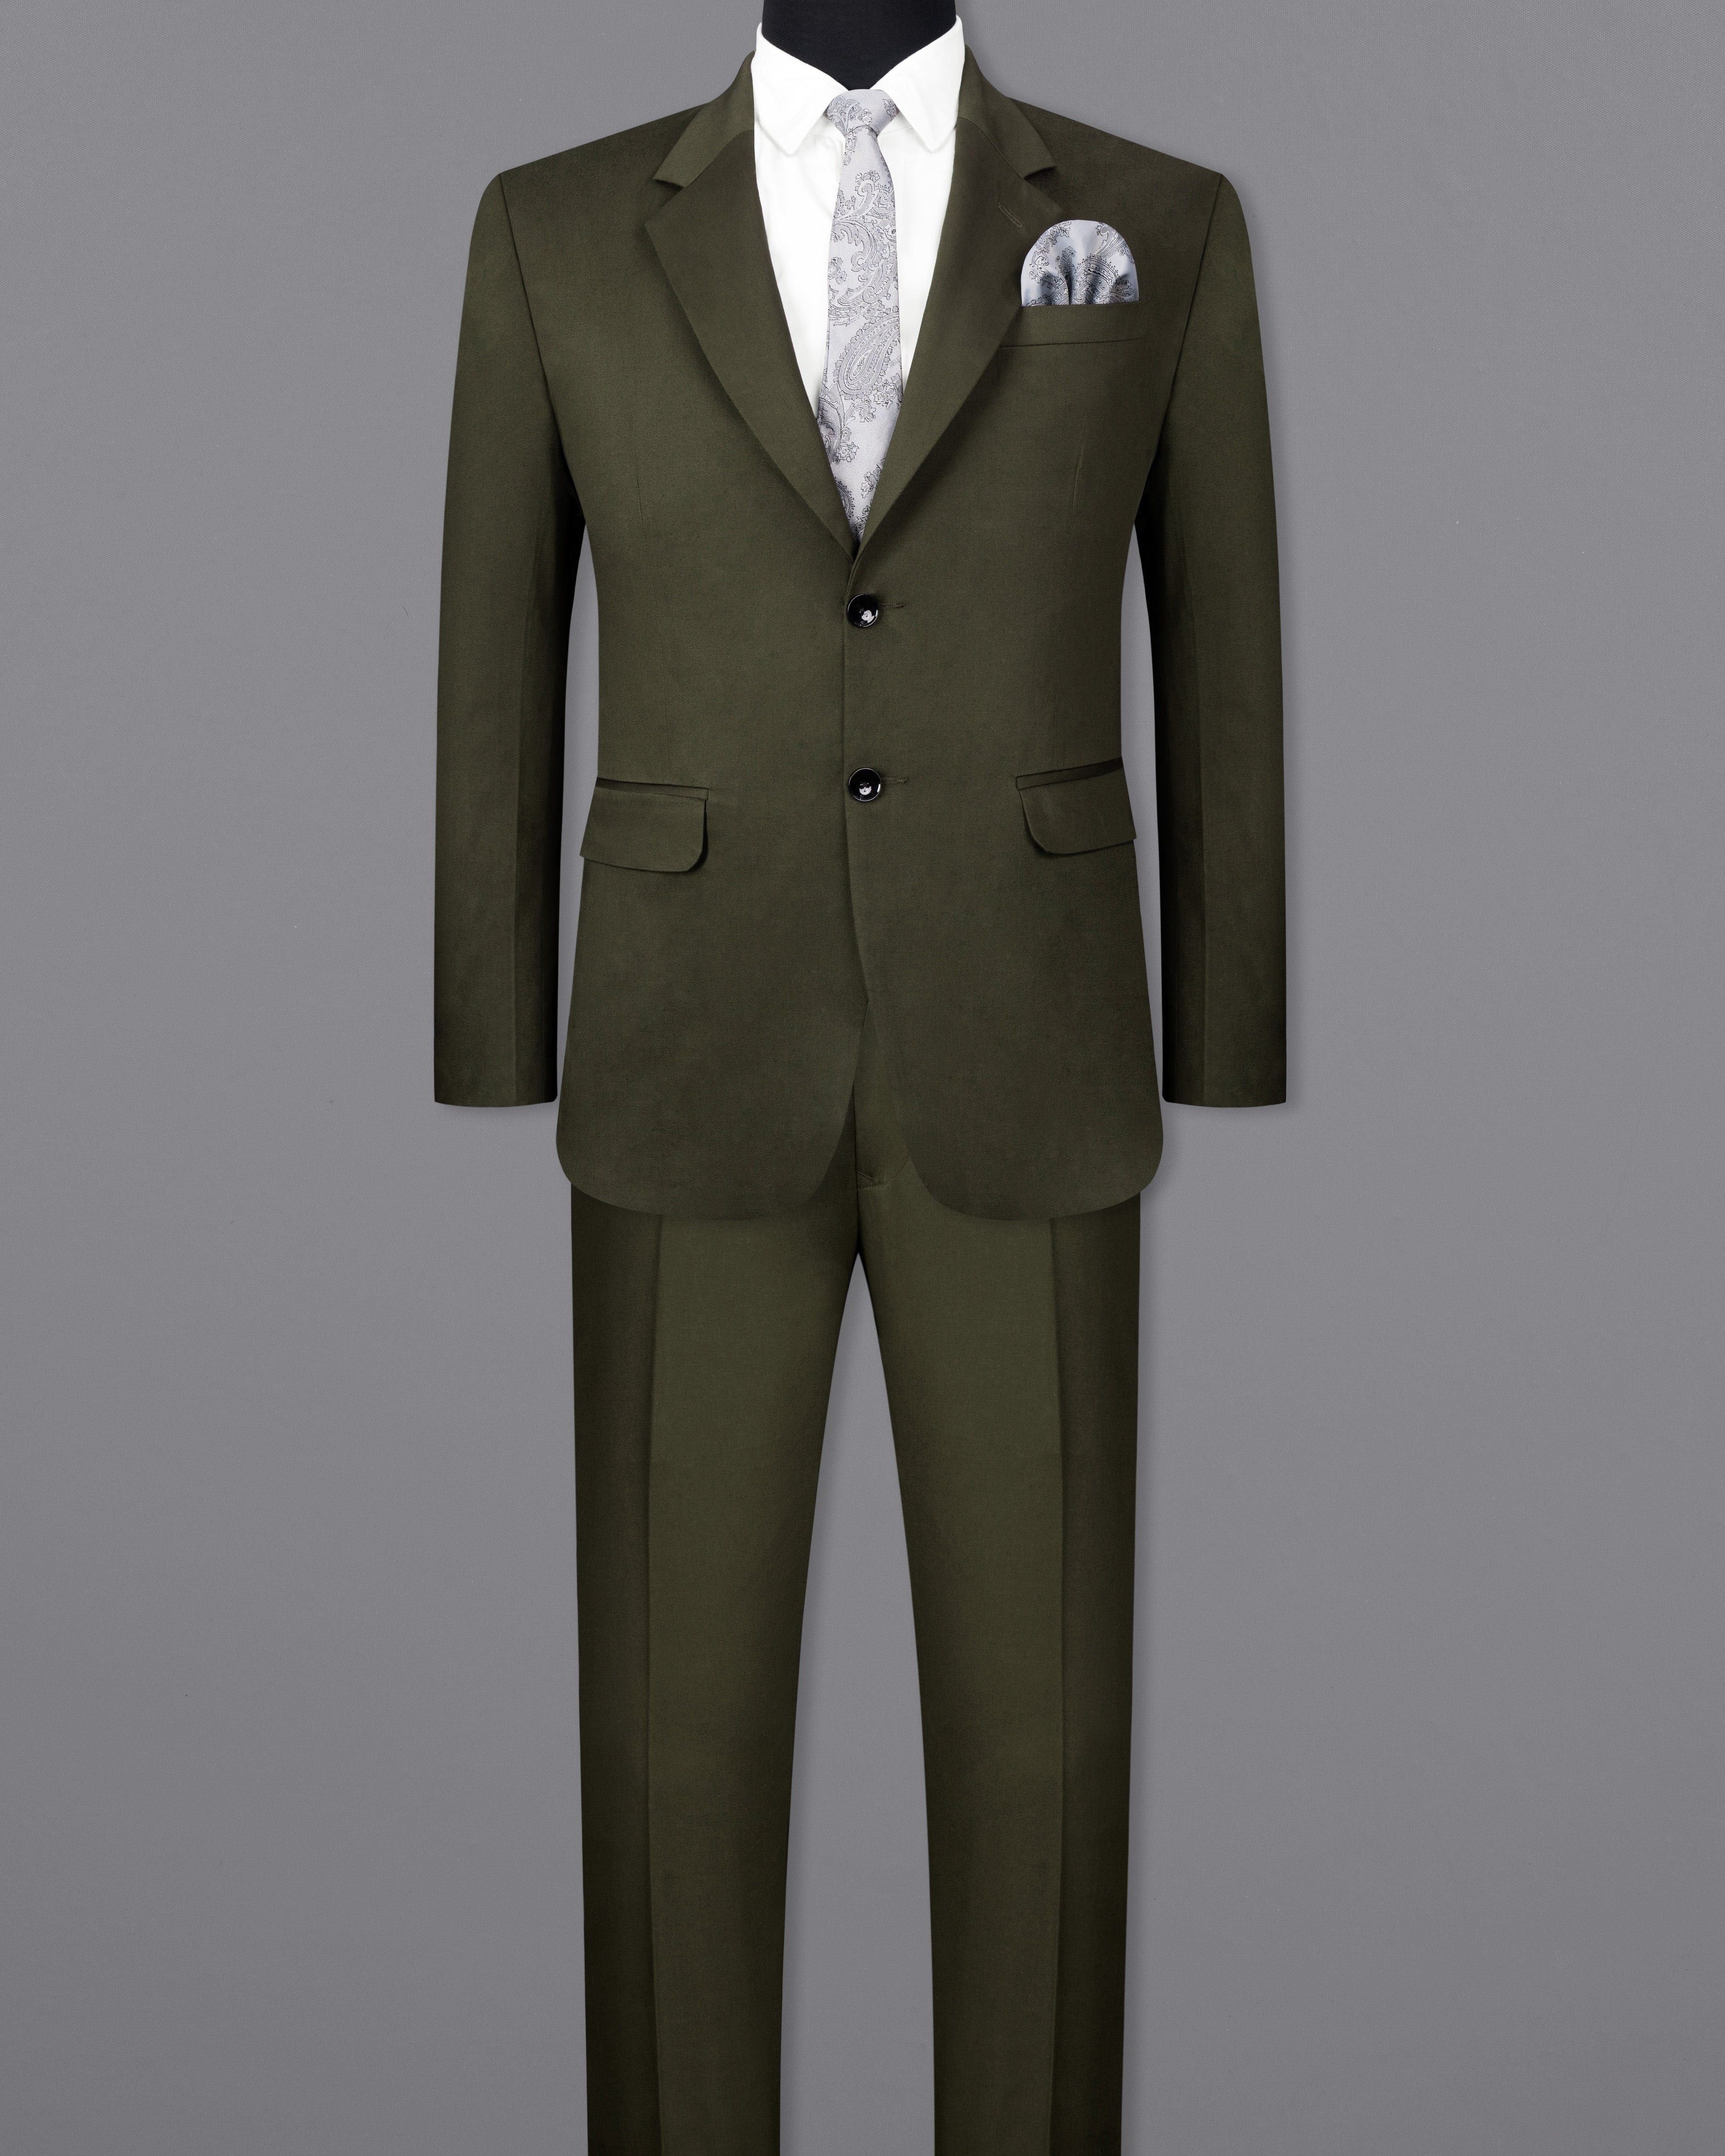 Taupe Green Solid Stretchable Premium Cotton Traveler Suit ST2642-SB-36, ST2642-SB-38, ST2642-SB-40, ST2642-SB-42, ST2642-SB-44, ST2642-SB-46, ST2642-SB-48, ST2642-SB-50, ST2642-SB-52, ST2642-SB-54, ST2642-SB-56, ST2642-SB-58, ST2642-SB-60